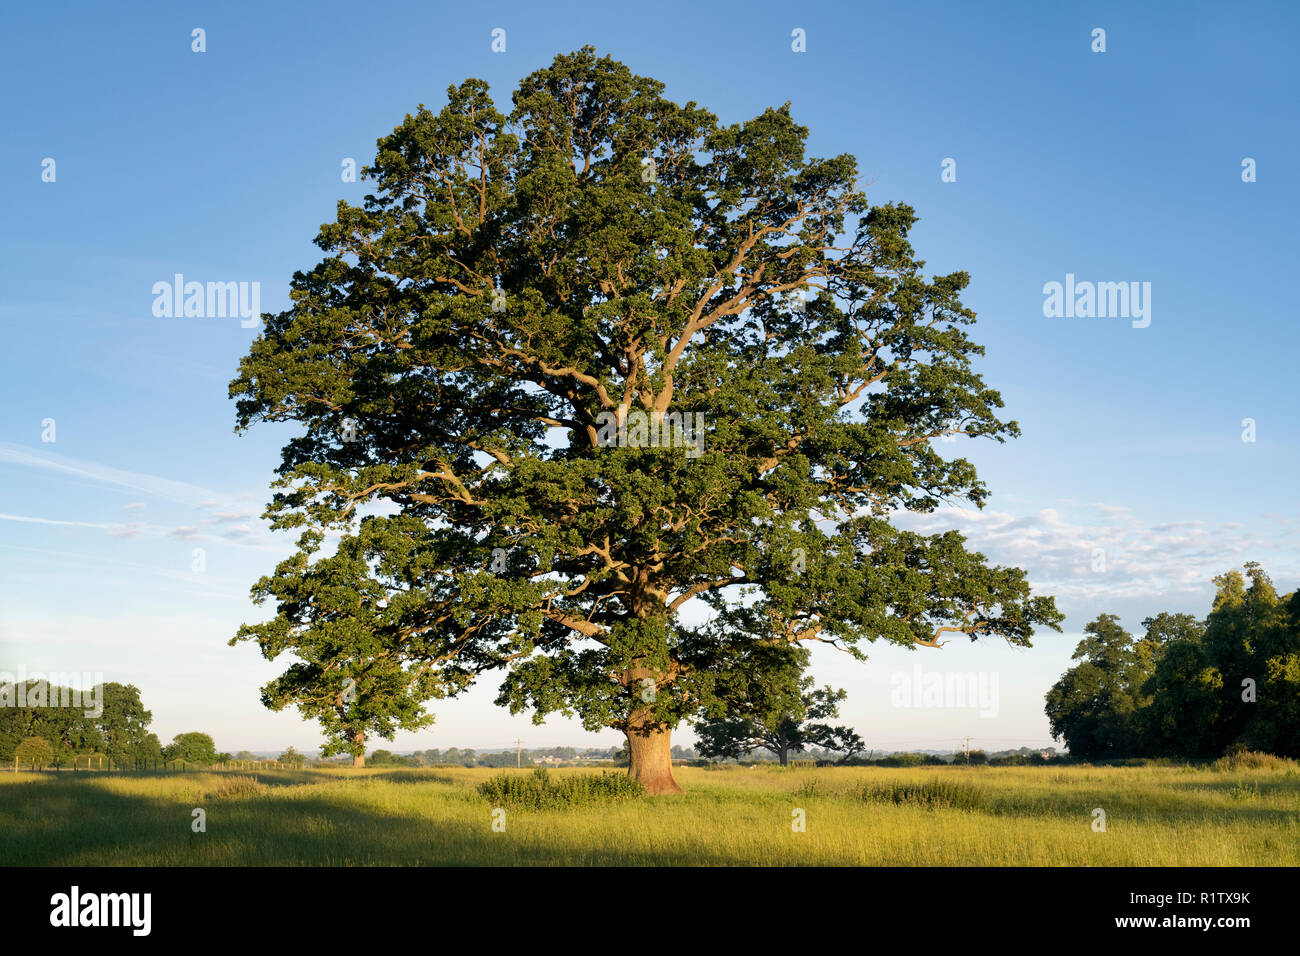 Quercus robur. Oak tree in summer in the english countryside. Kings Sutton, Northamptonshire. UK. A scene taken in different seasons Stock Photo